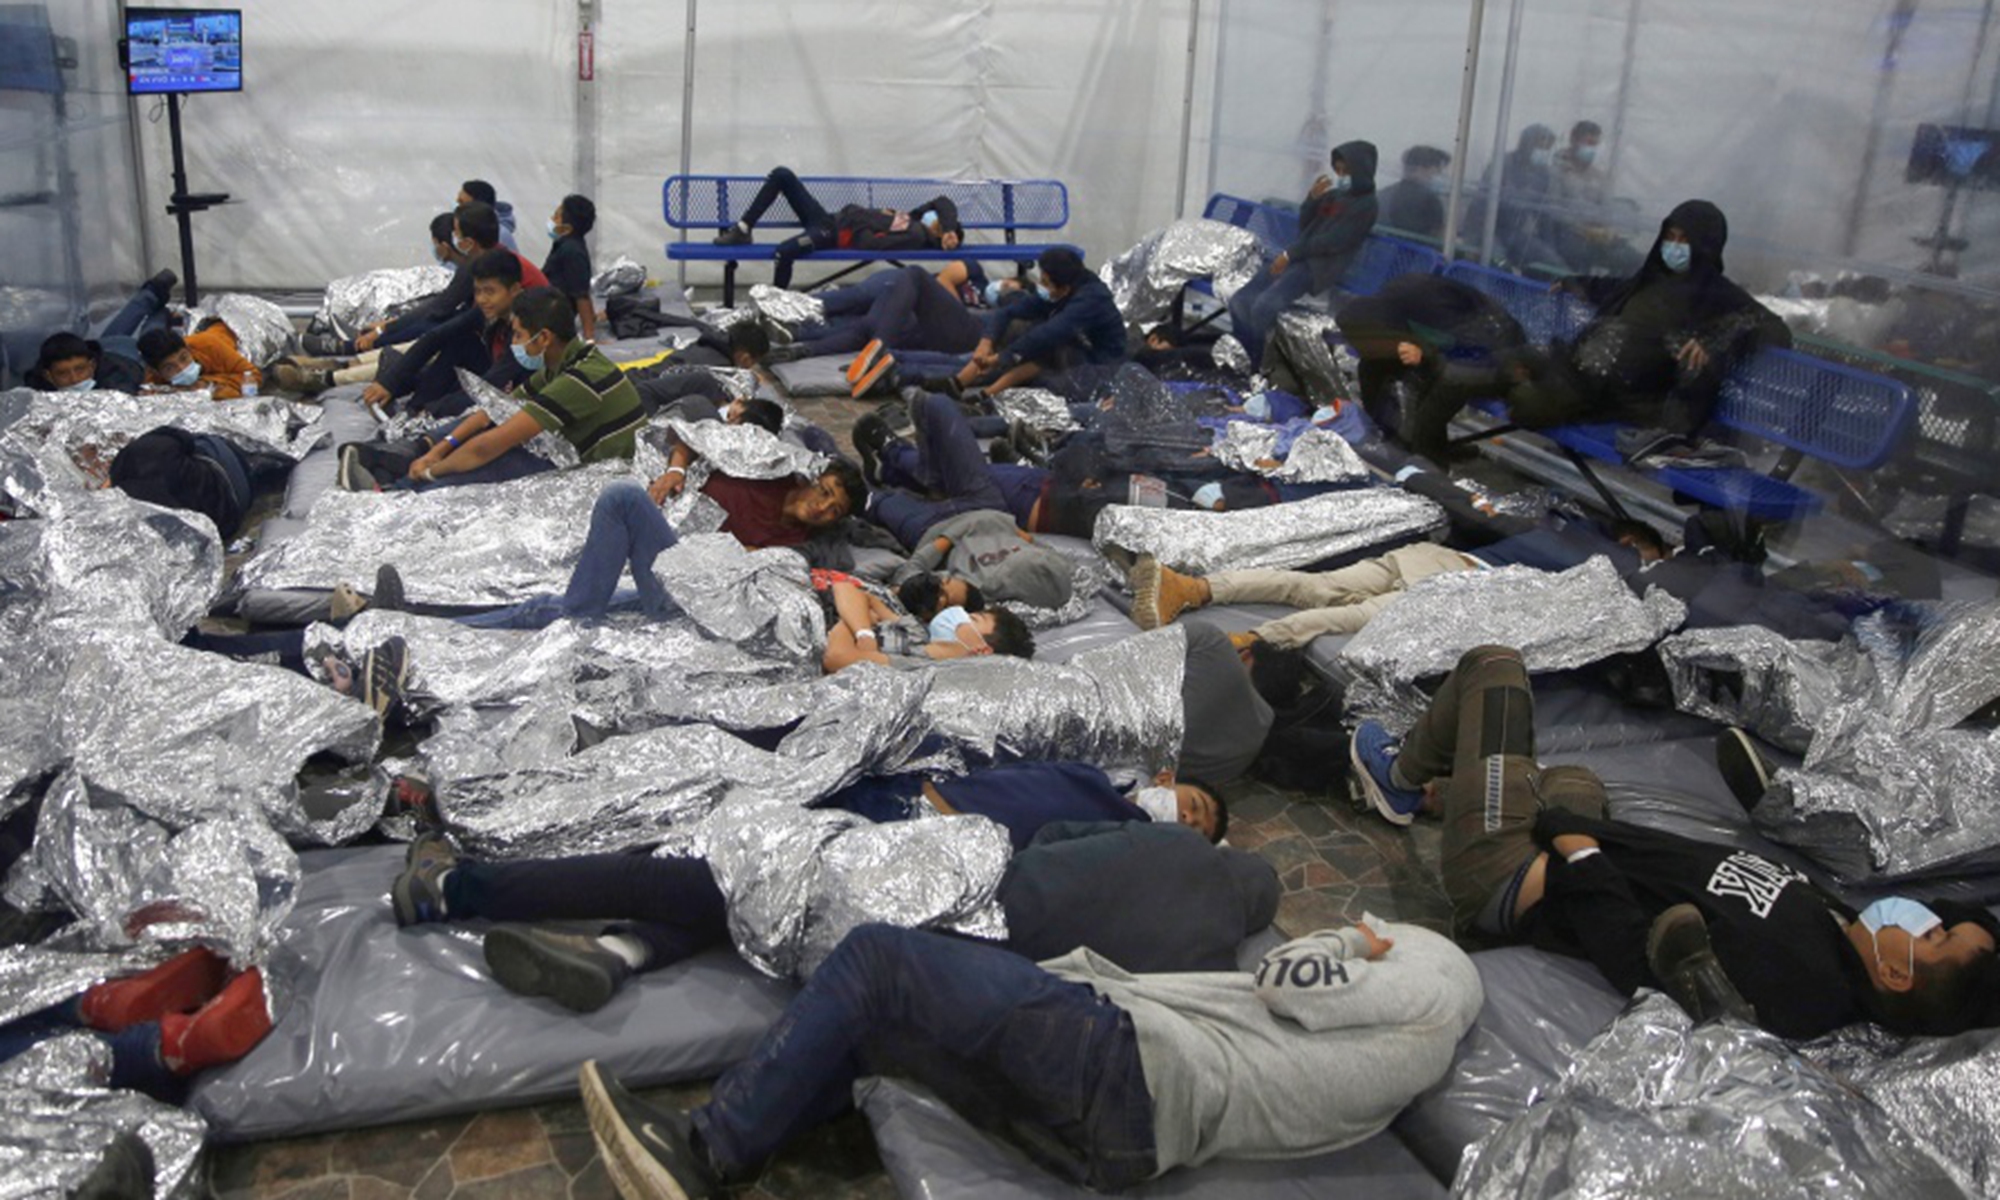 Young migrants rest at the US Customs and Border Protection facility, the main detention center for unaccompanied children in the Rio Grande Valley, in Donna, Texas, Tuesday. The Biden administration for the first time allowed some media to visit the facility on Tuesday. Photo: The Paper